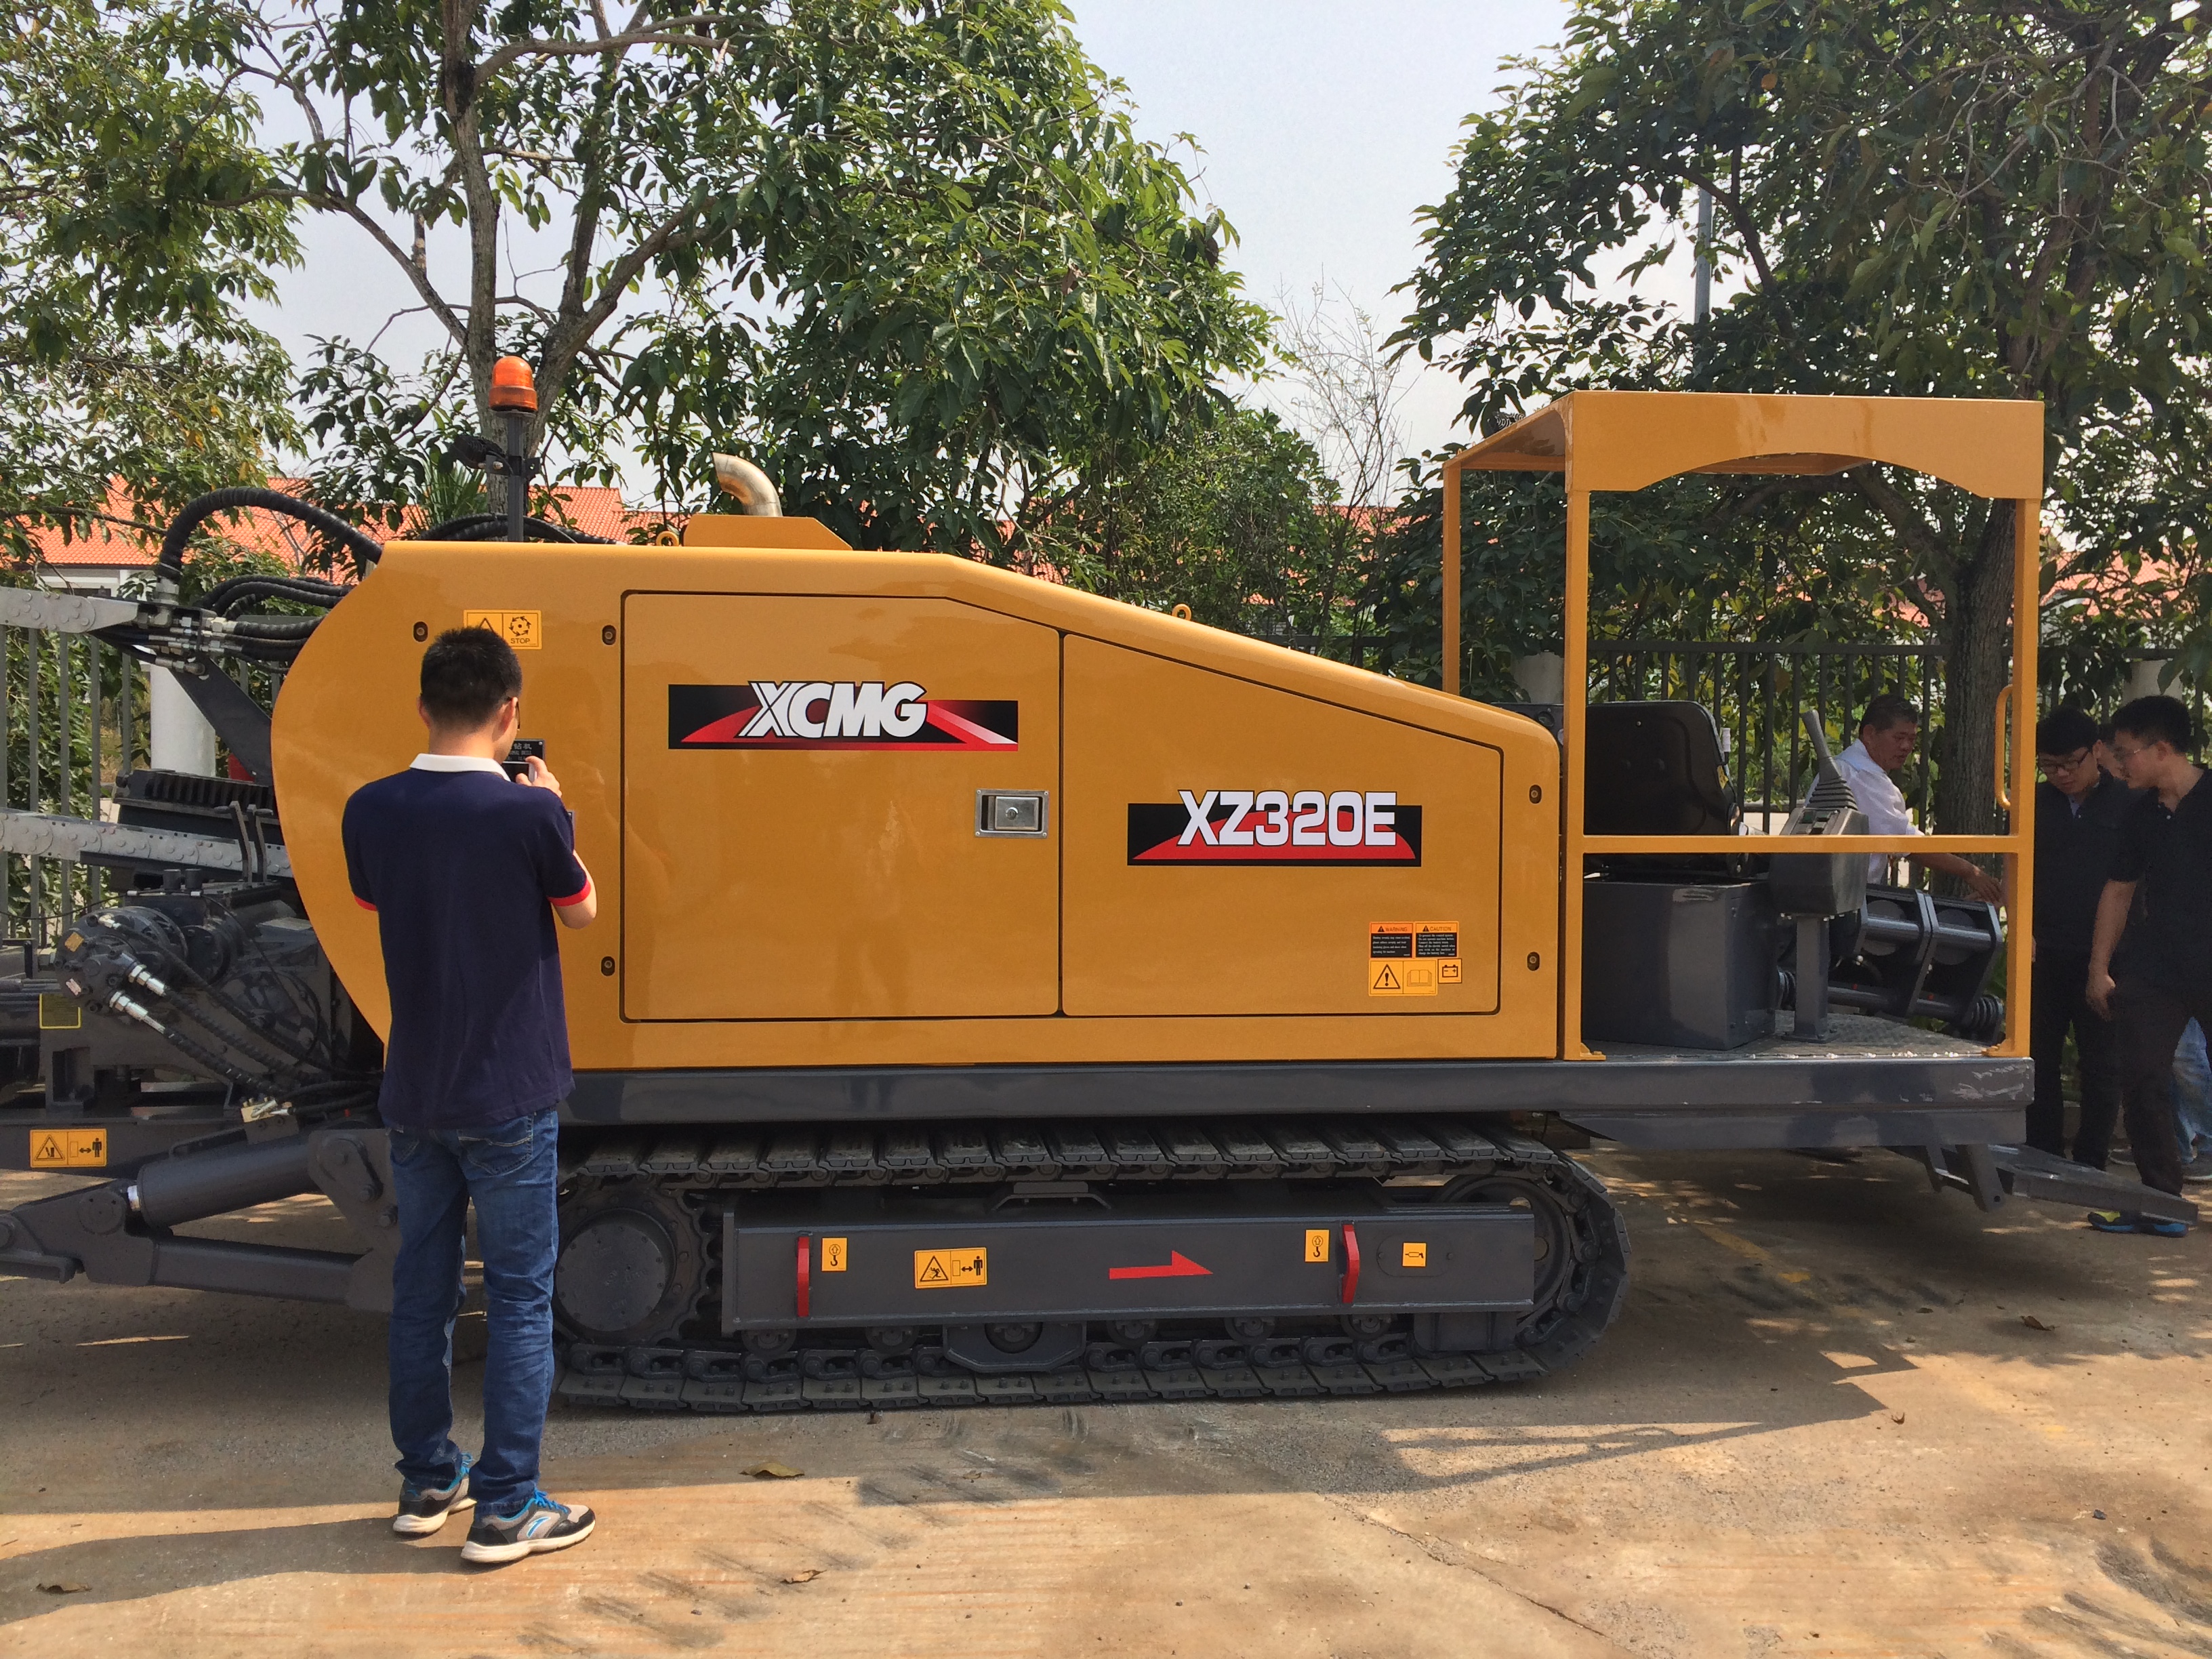 XCMG XZ320E Horizontal Directional Drilling Rig HDD rig